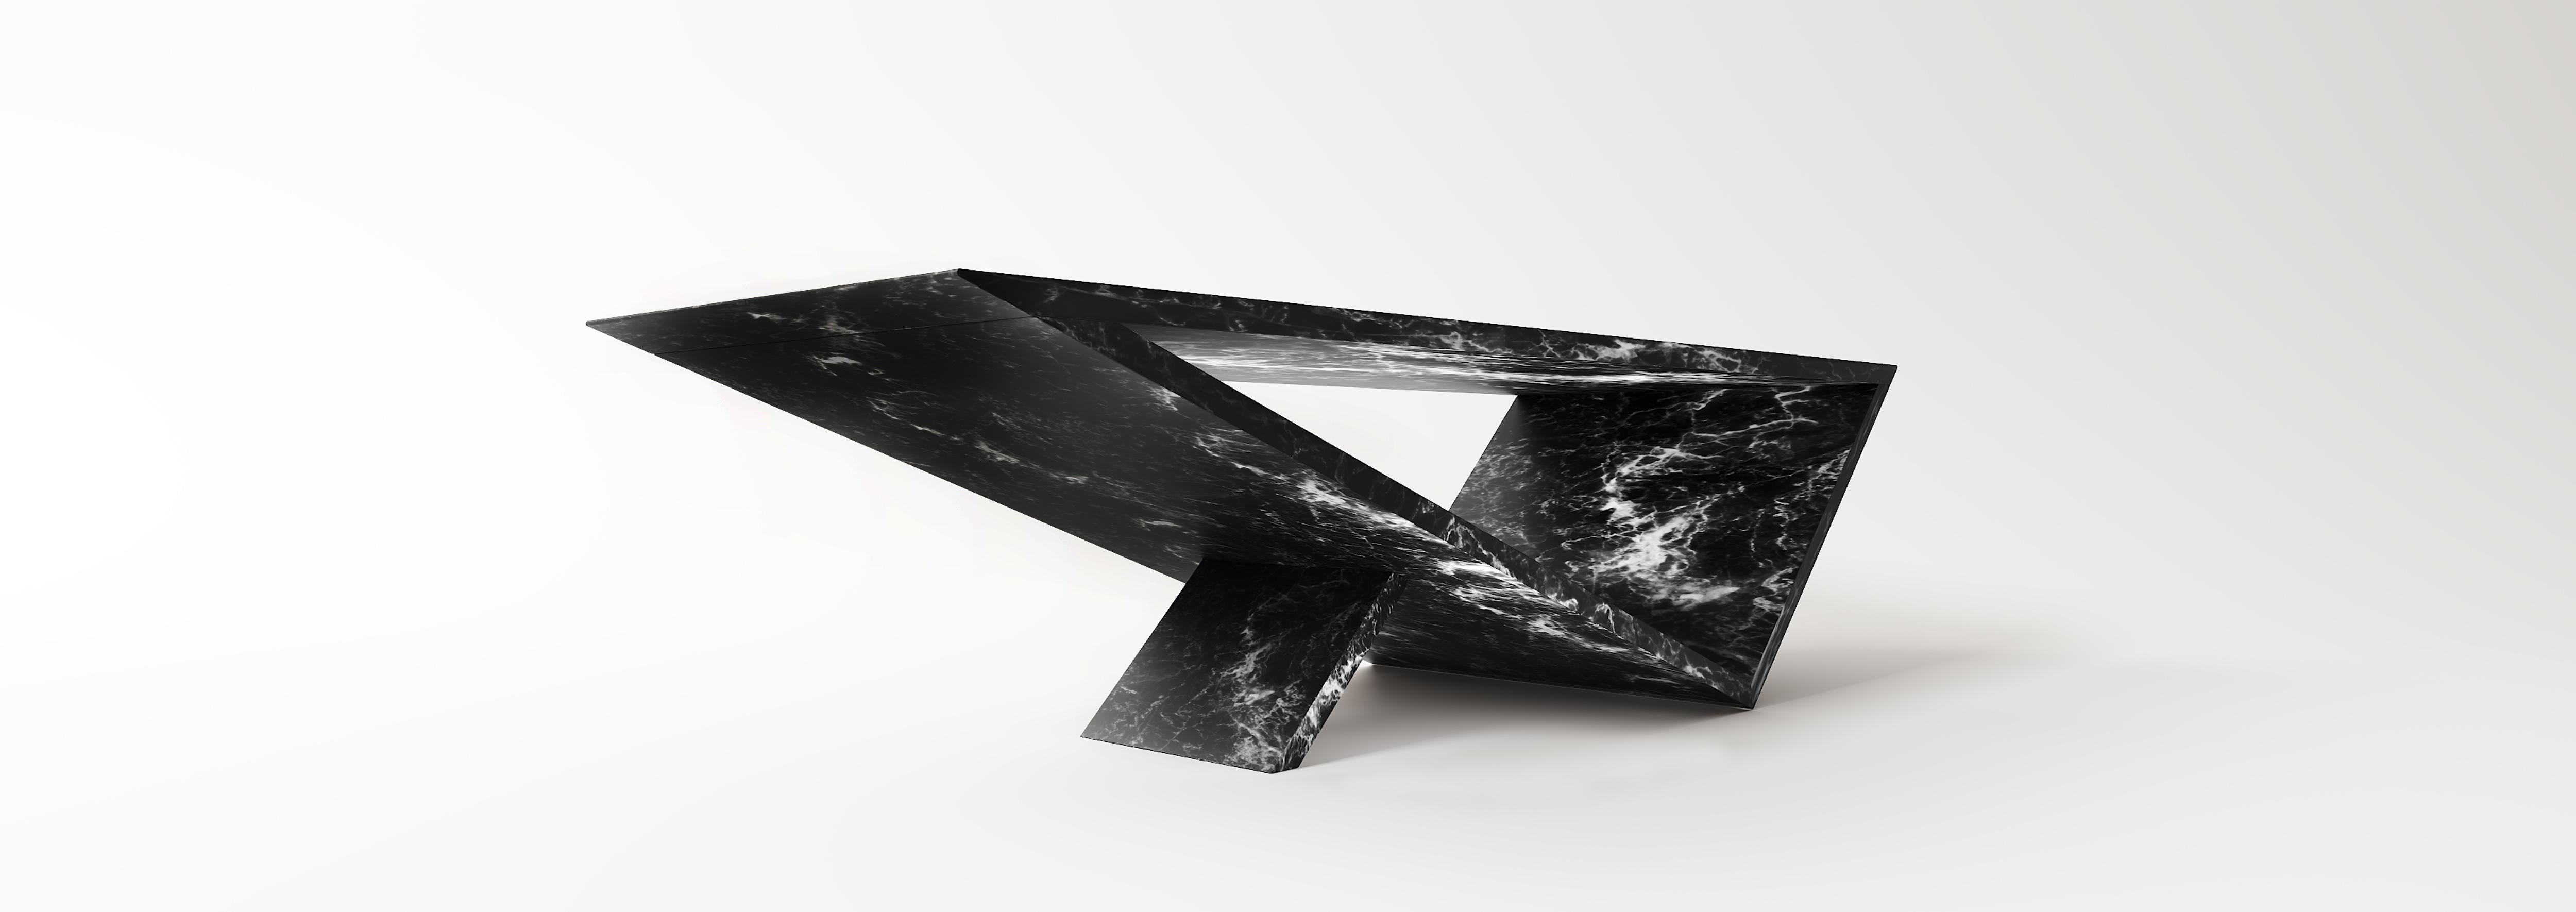 American Time/Space Portal Coffee Table in Black Soapstone by Neal Aronowitz Design For Sale